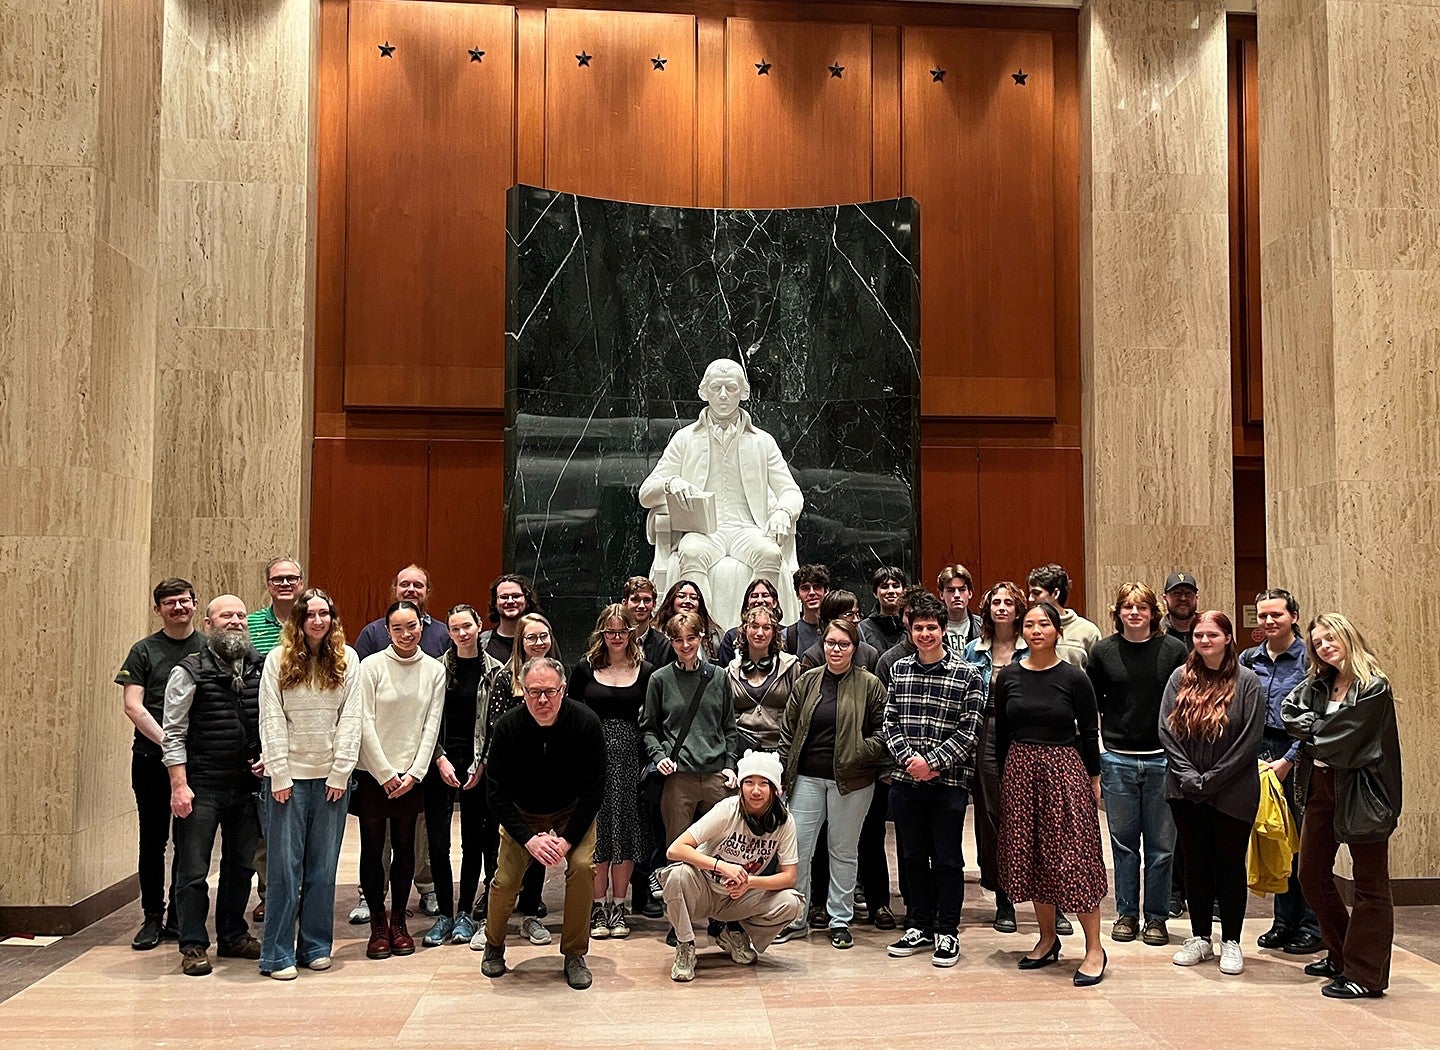 tour group of students posing in front of statue at library of congress